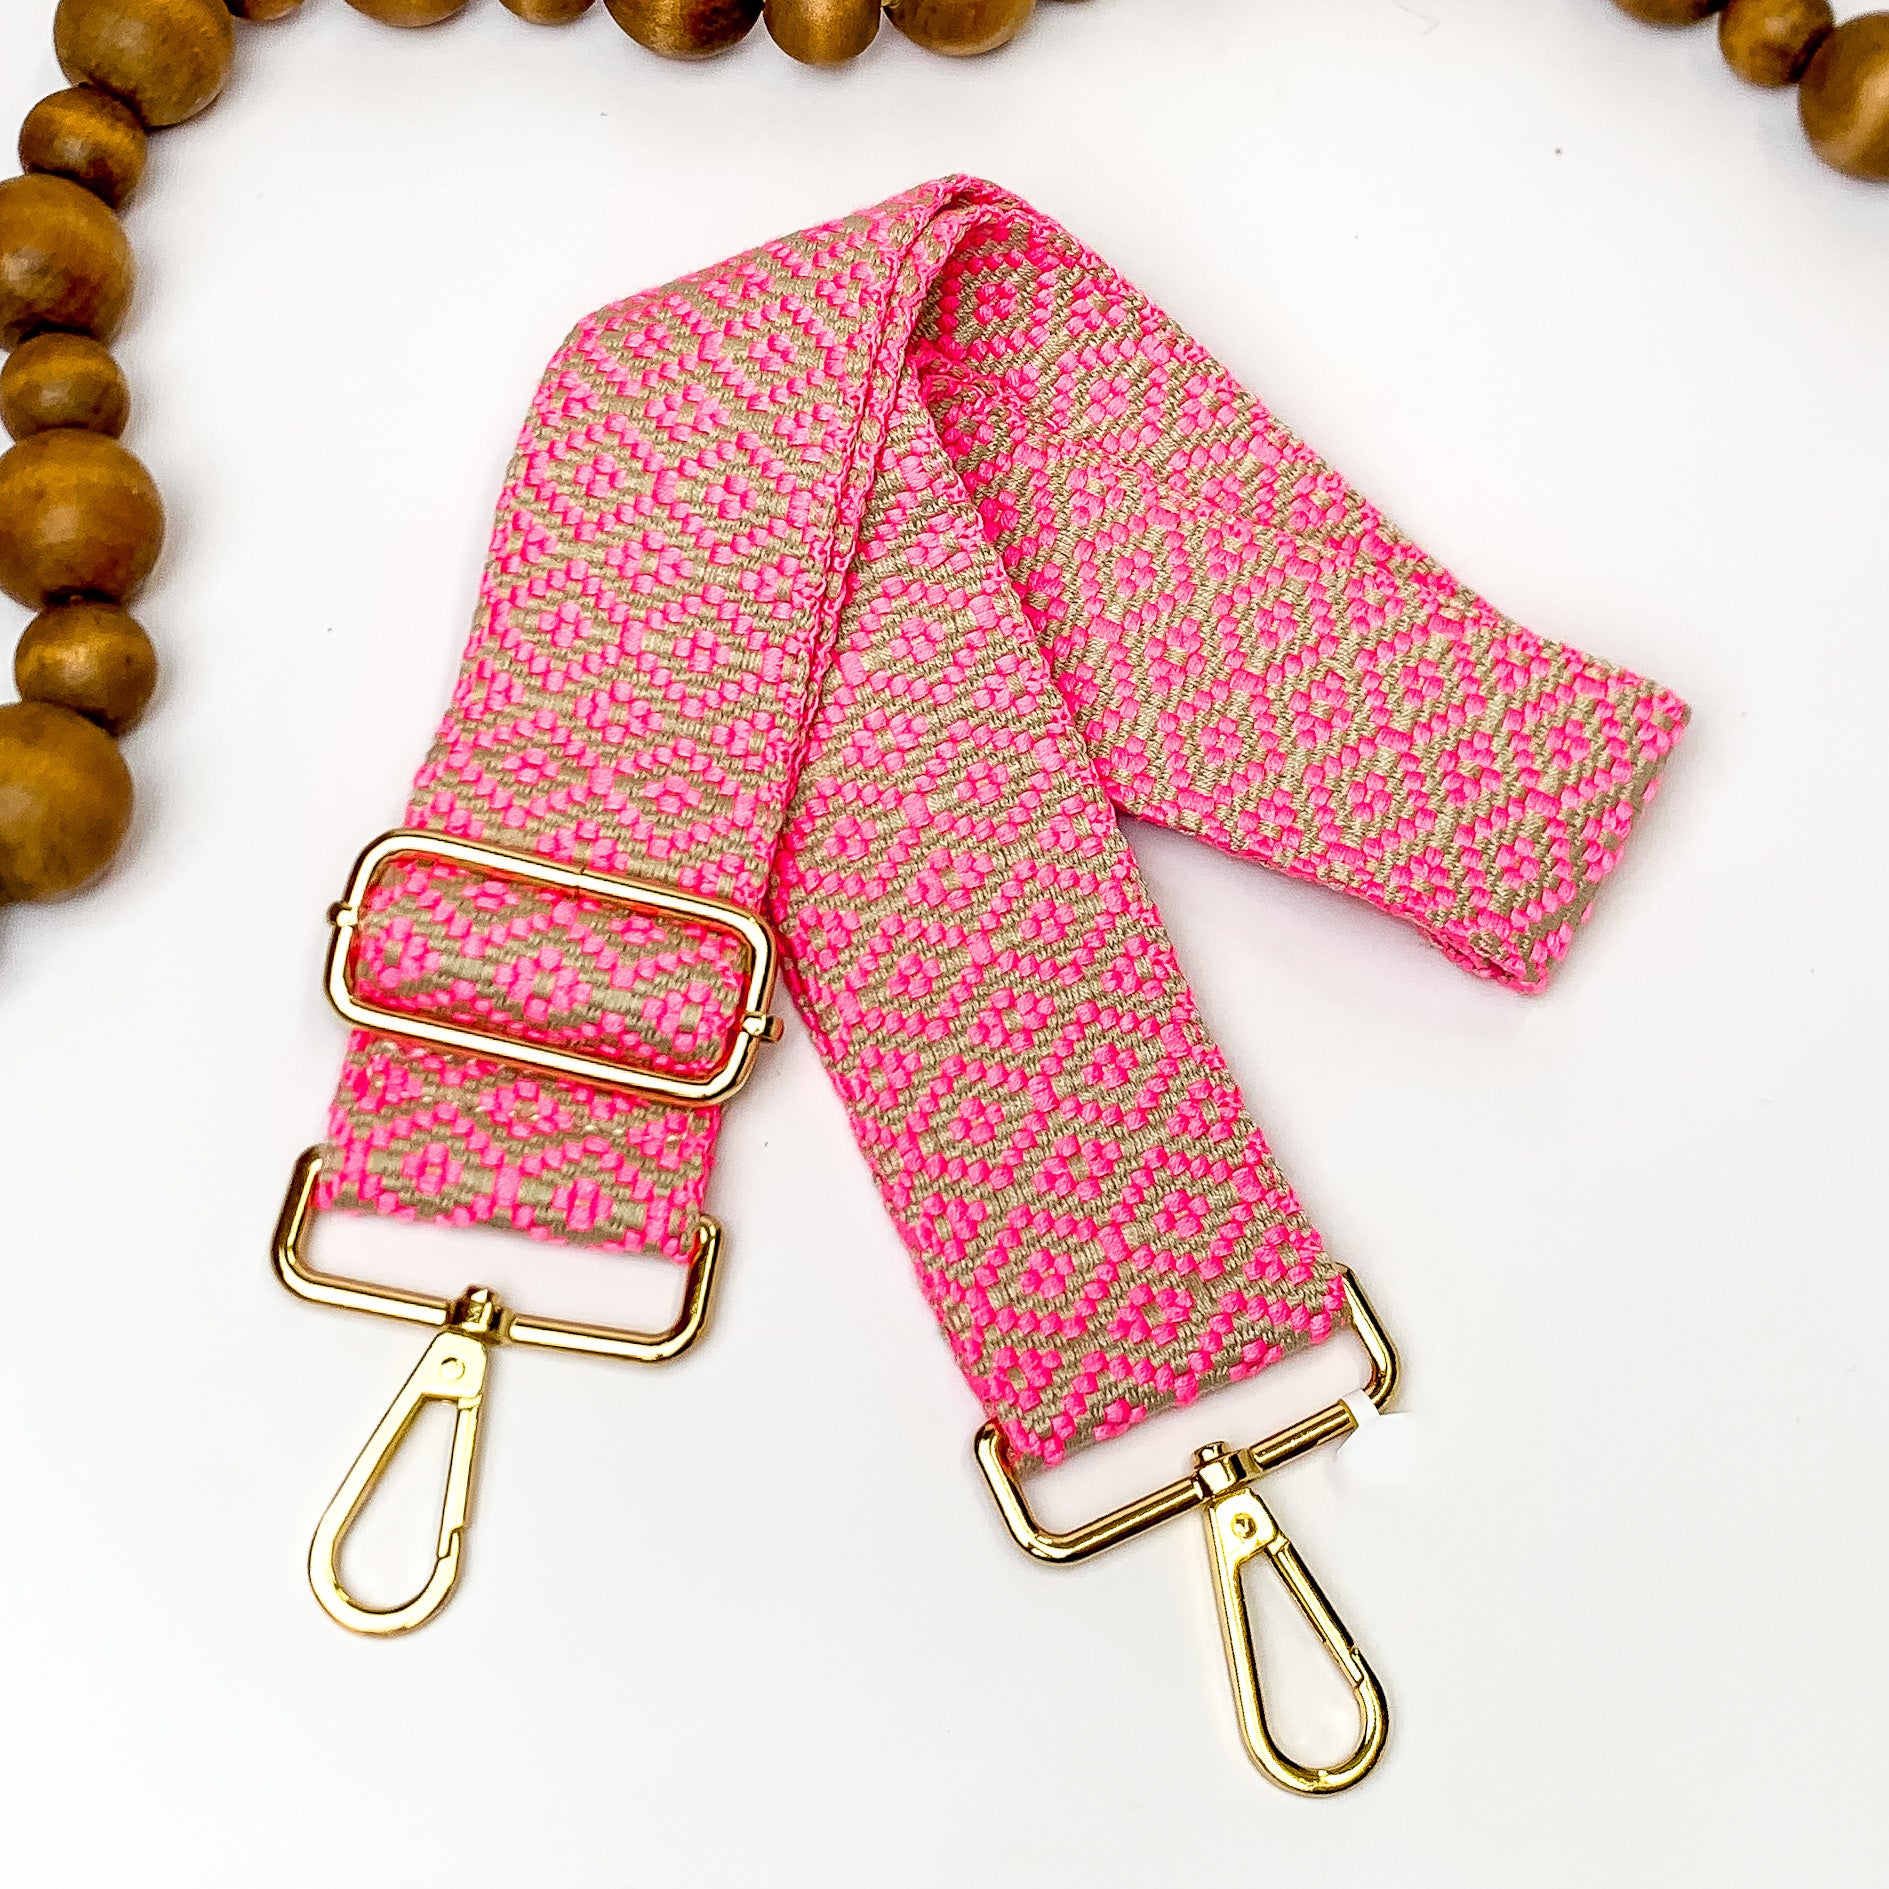 Beaige canvas purse strap with hot pink diamond design. This purse strap includes gold accents. This purse strap is pictured on a white background with brown beads at the top.